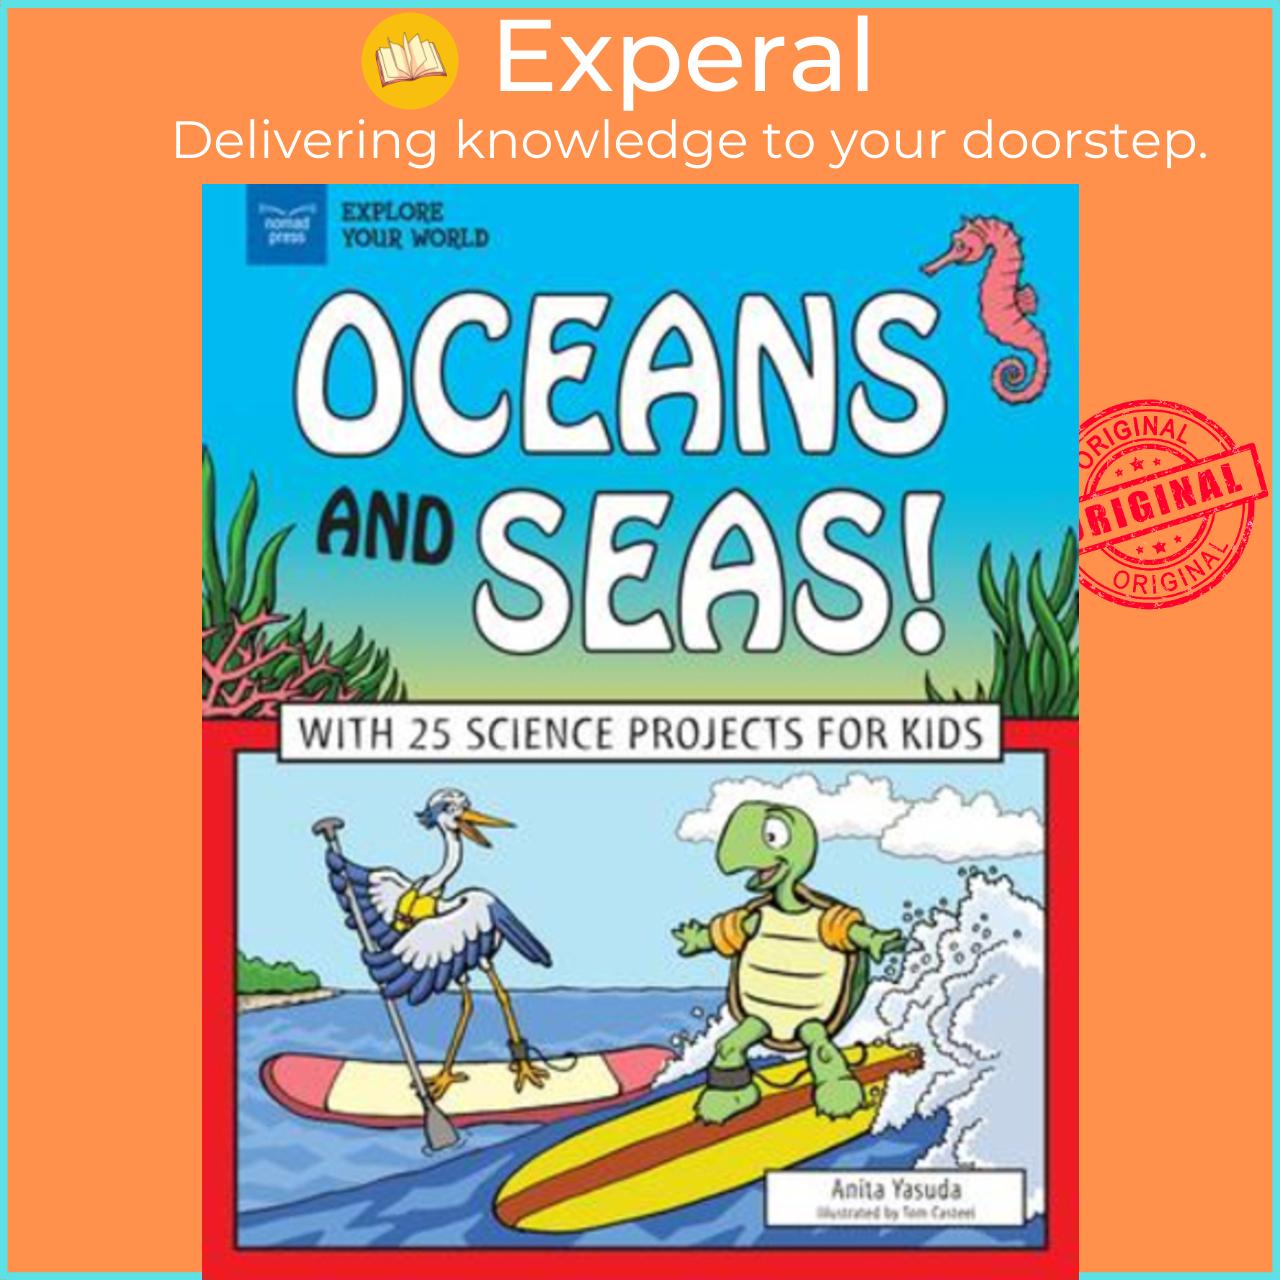 Sách - Oceans and Seas! : With 25 Science Projects for Kids by Anita Yasuda (US edition, paperback)